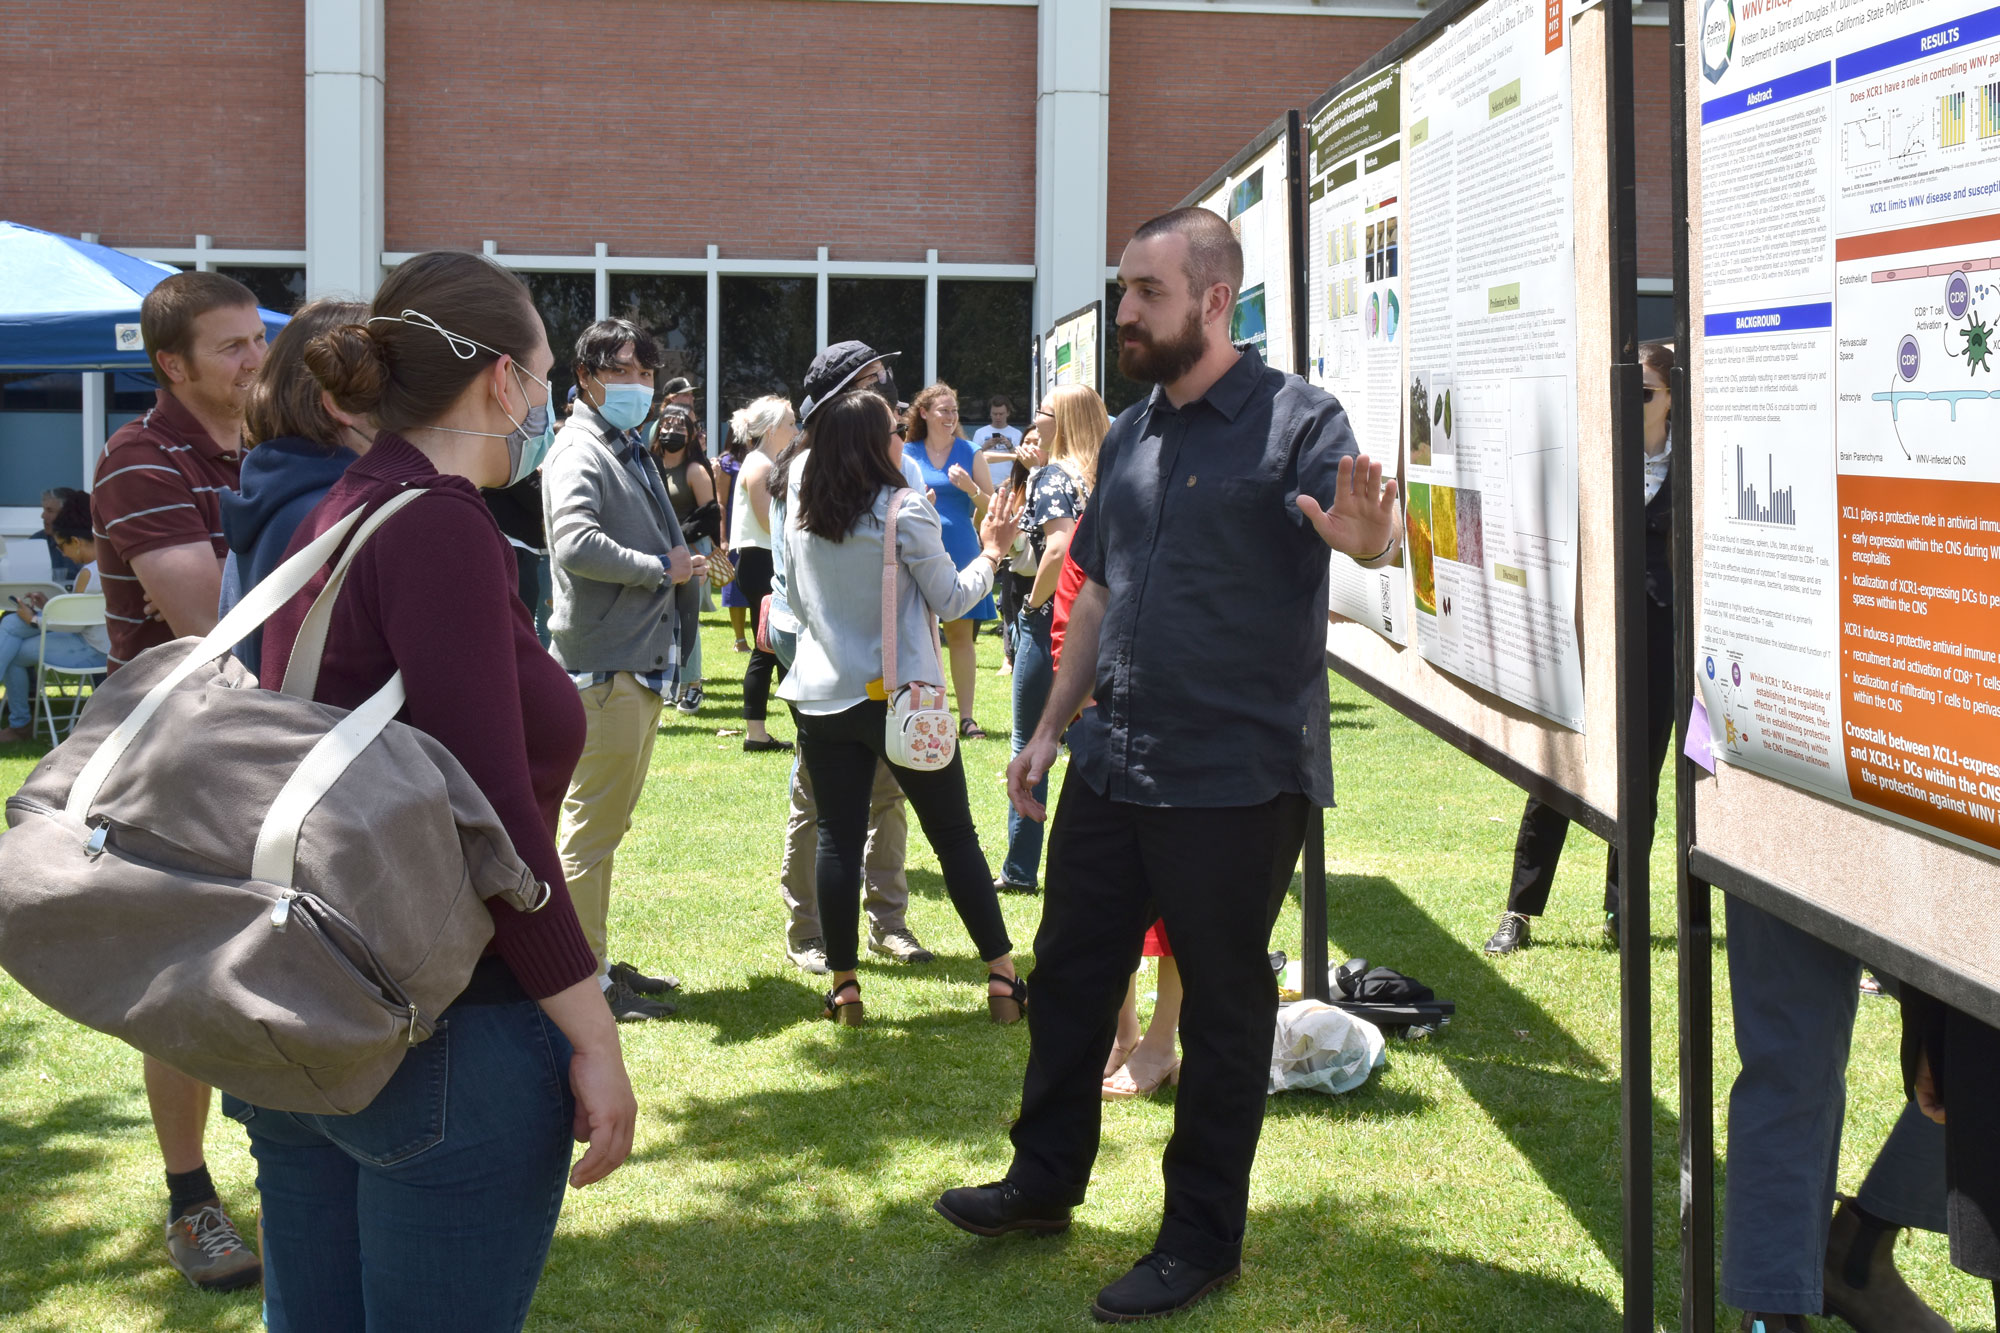 Students at the research symposium